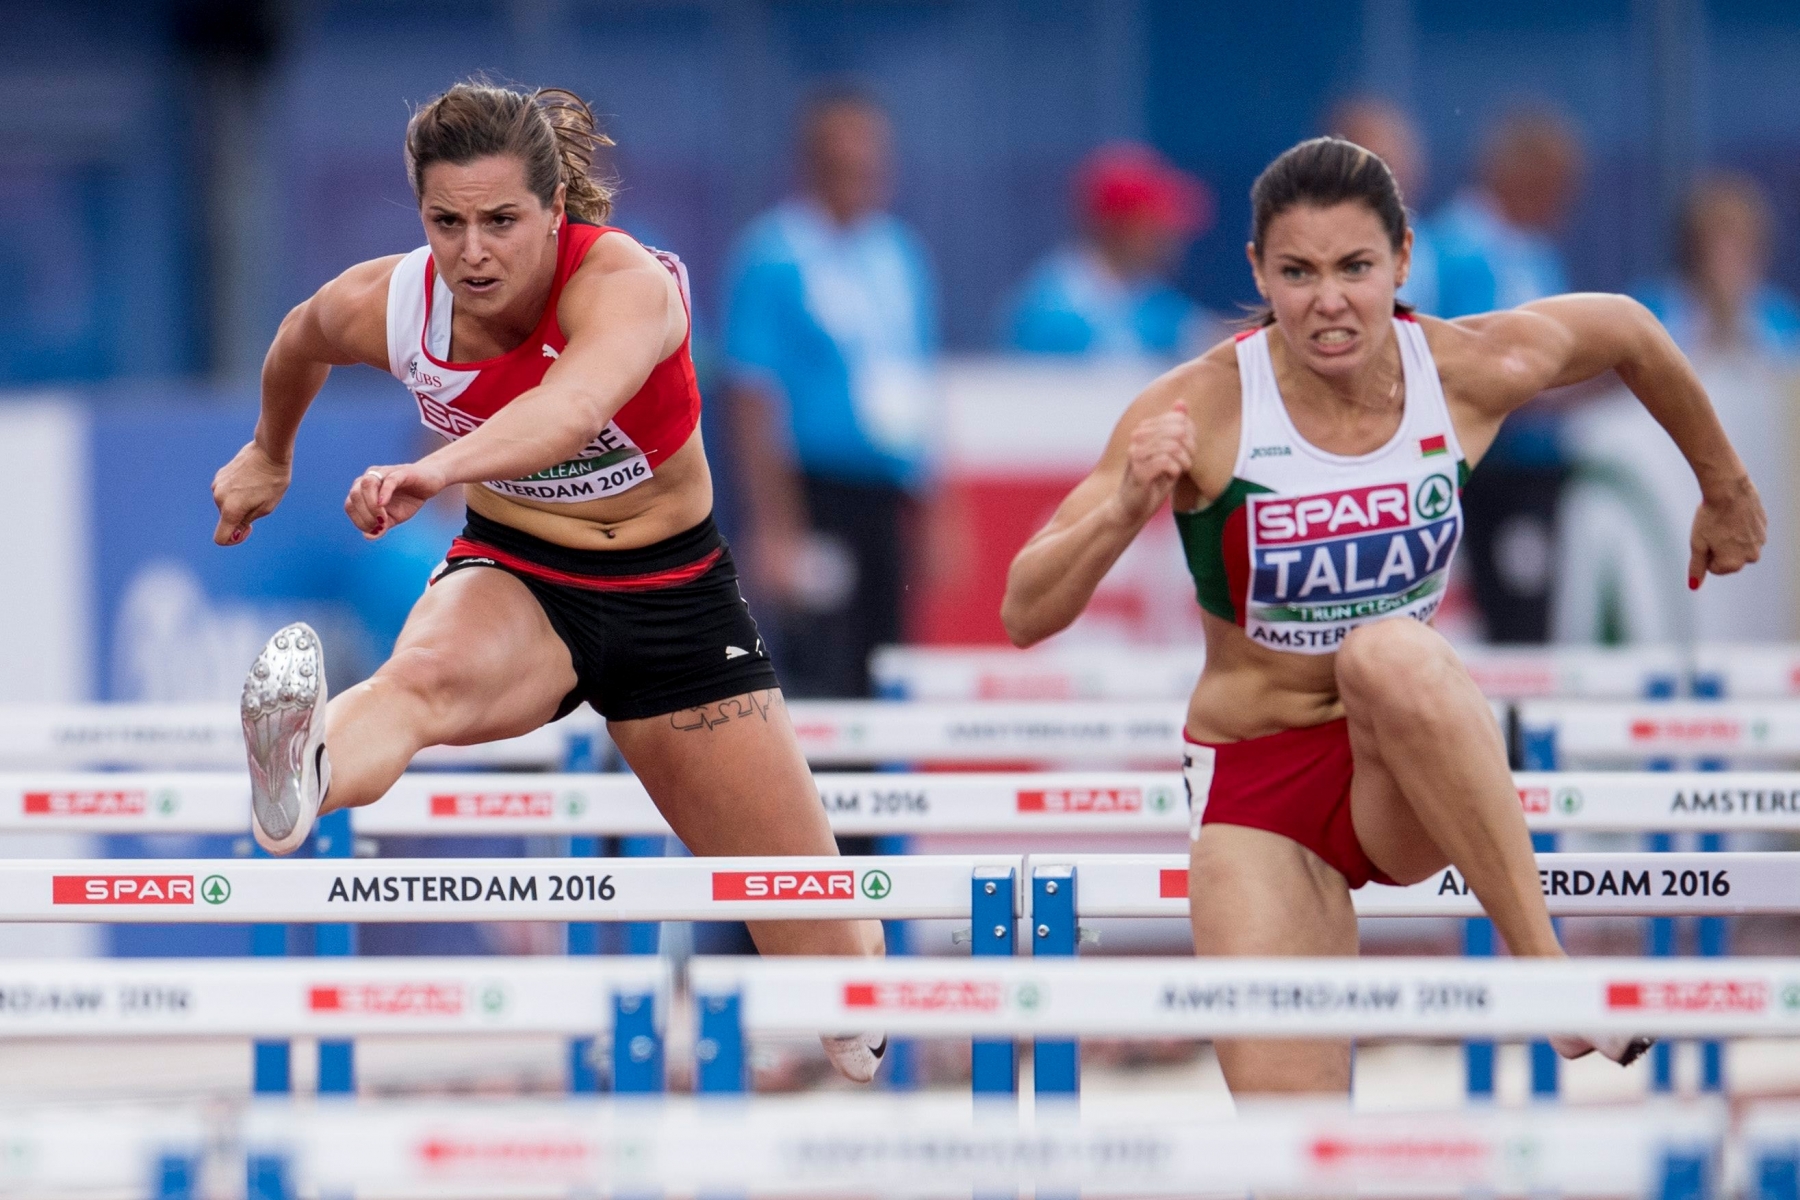 Swiss athlete Clelia Rard-Reuse, left, jumps next to Alina Talay of Bulgaria, right, during the women's 100m hurdles final at the 2016 European Athletics Championships in Amsterdam, Netherlands, Thursday, 07 July 2016. The 2016 European Athletics Championships in Amsterdam, Netherlands, runs from 06 to 10 July 2016. (KEYSTONE/Ennio Leanza) LEICHTATHLETIK EM 2016 AMSTERDAM